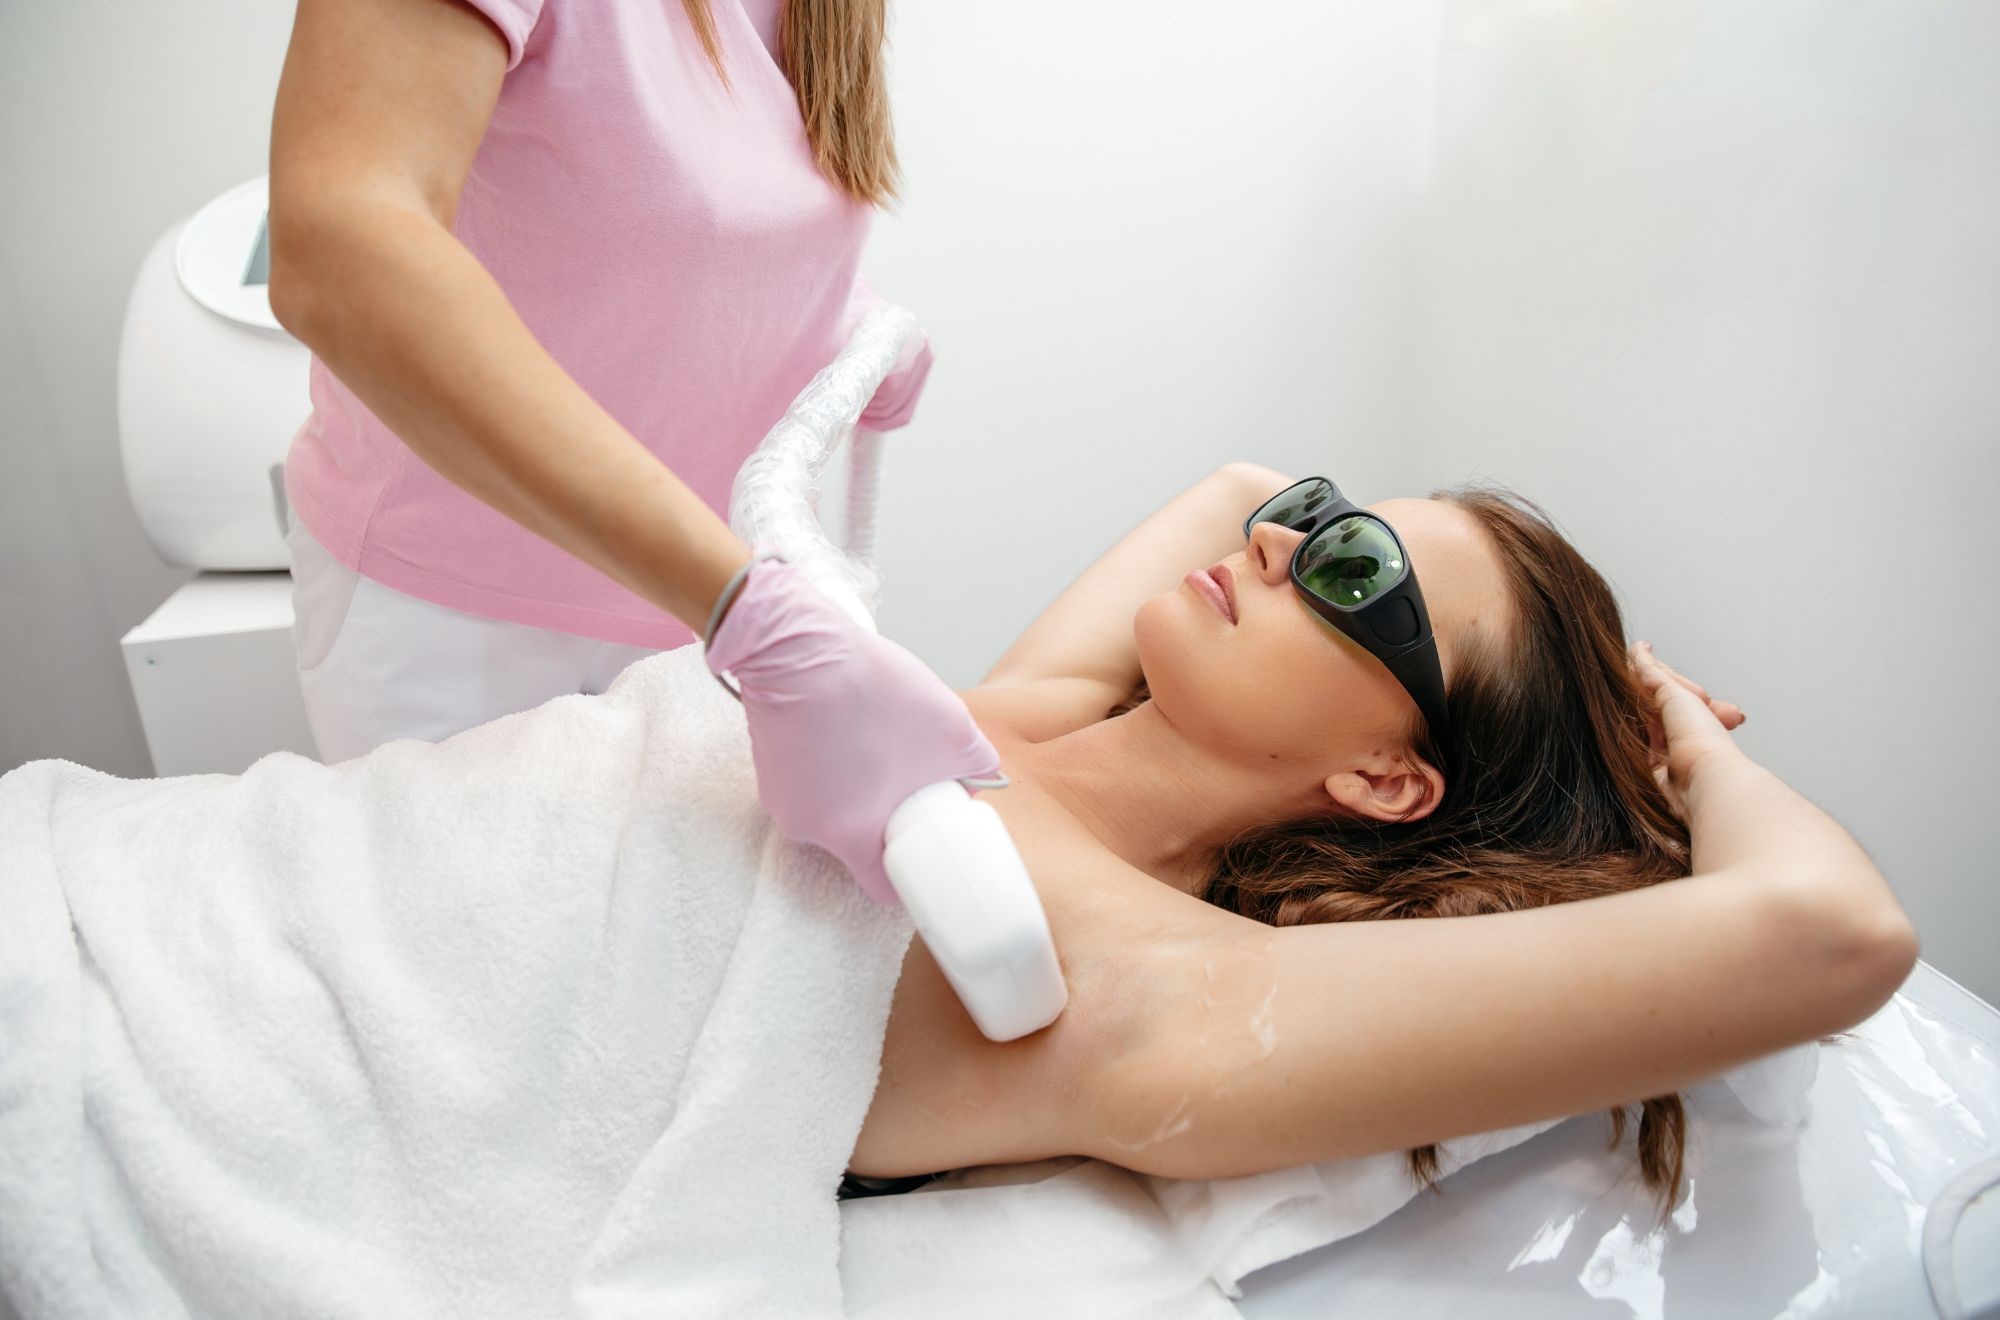 Relax! Regardless of how many sessions of laser hair removal you need, they’re all included at Bellissima.